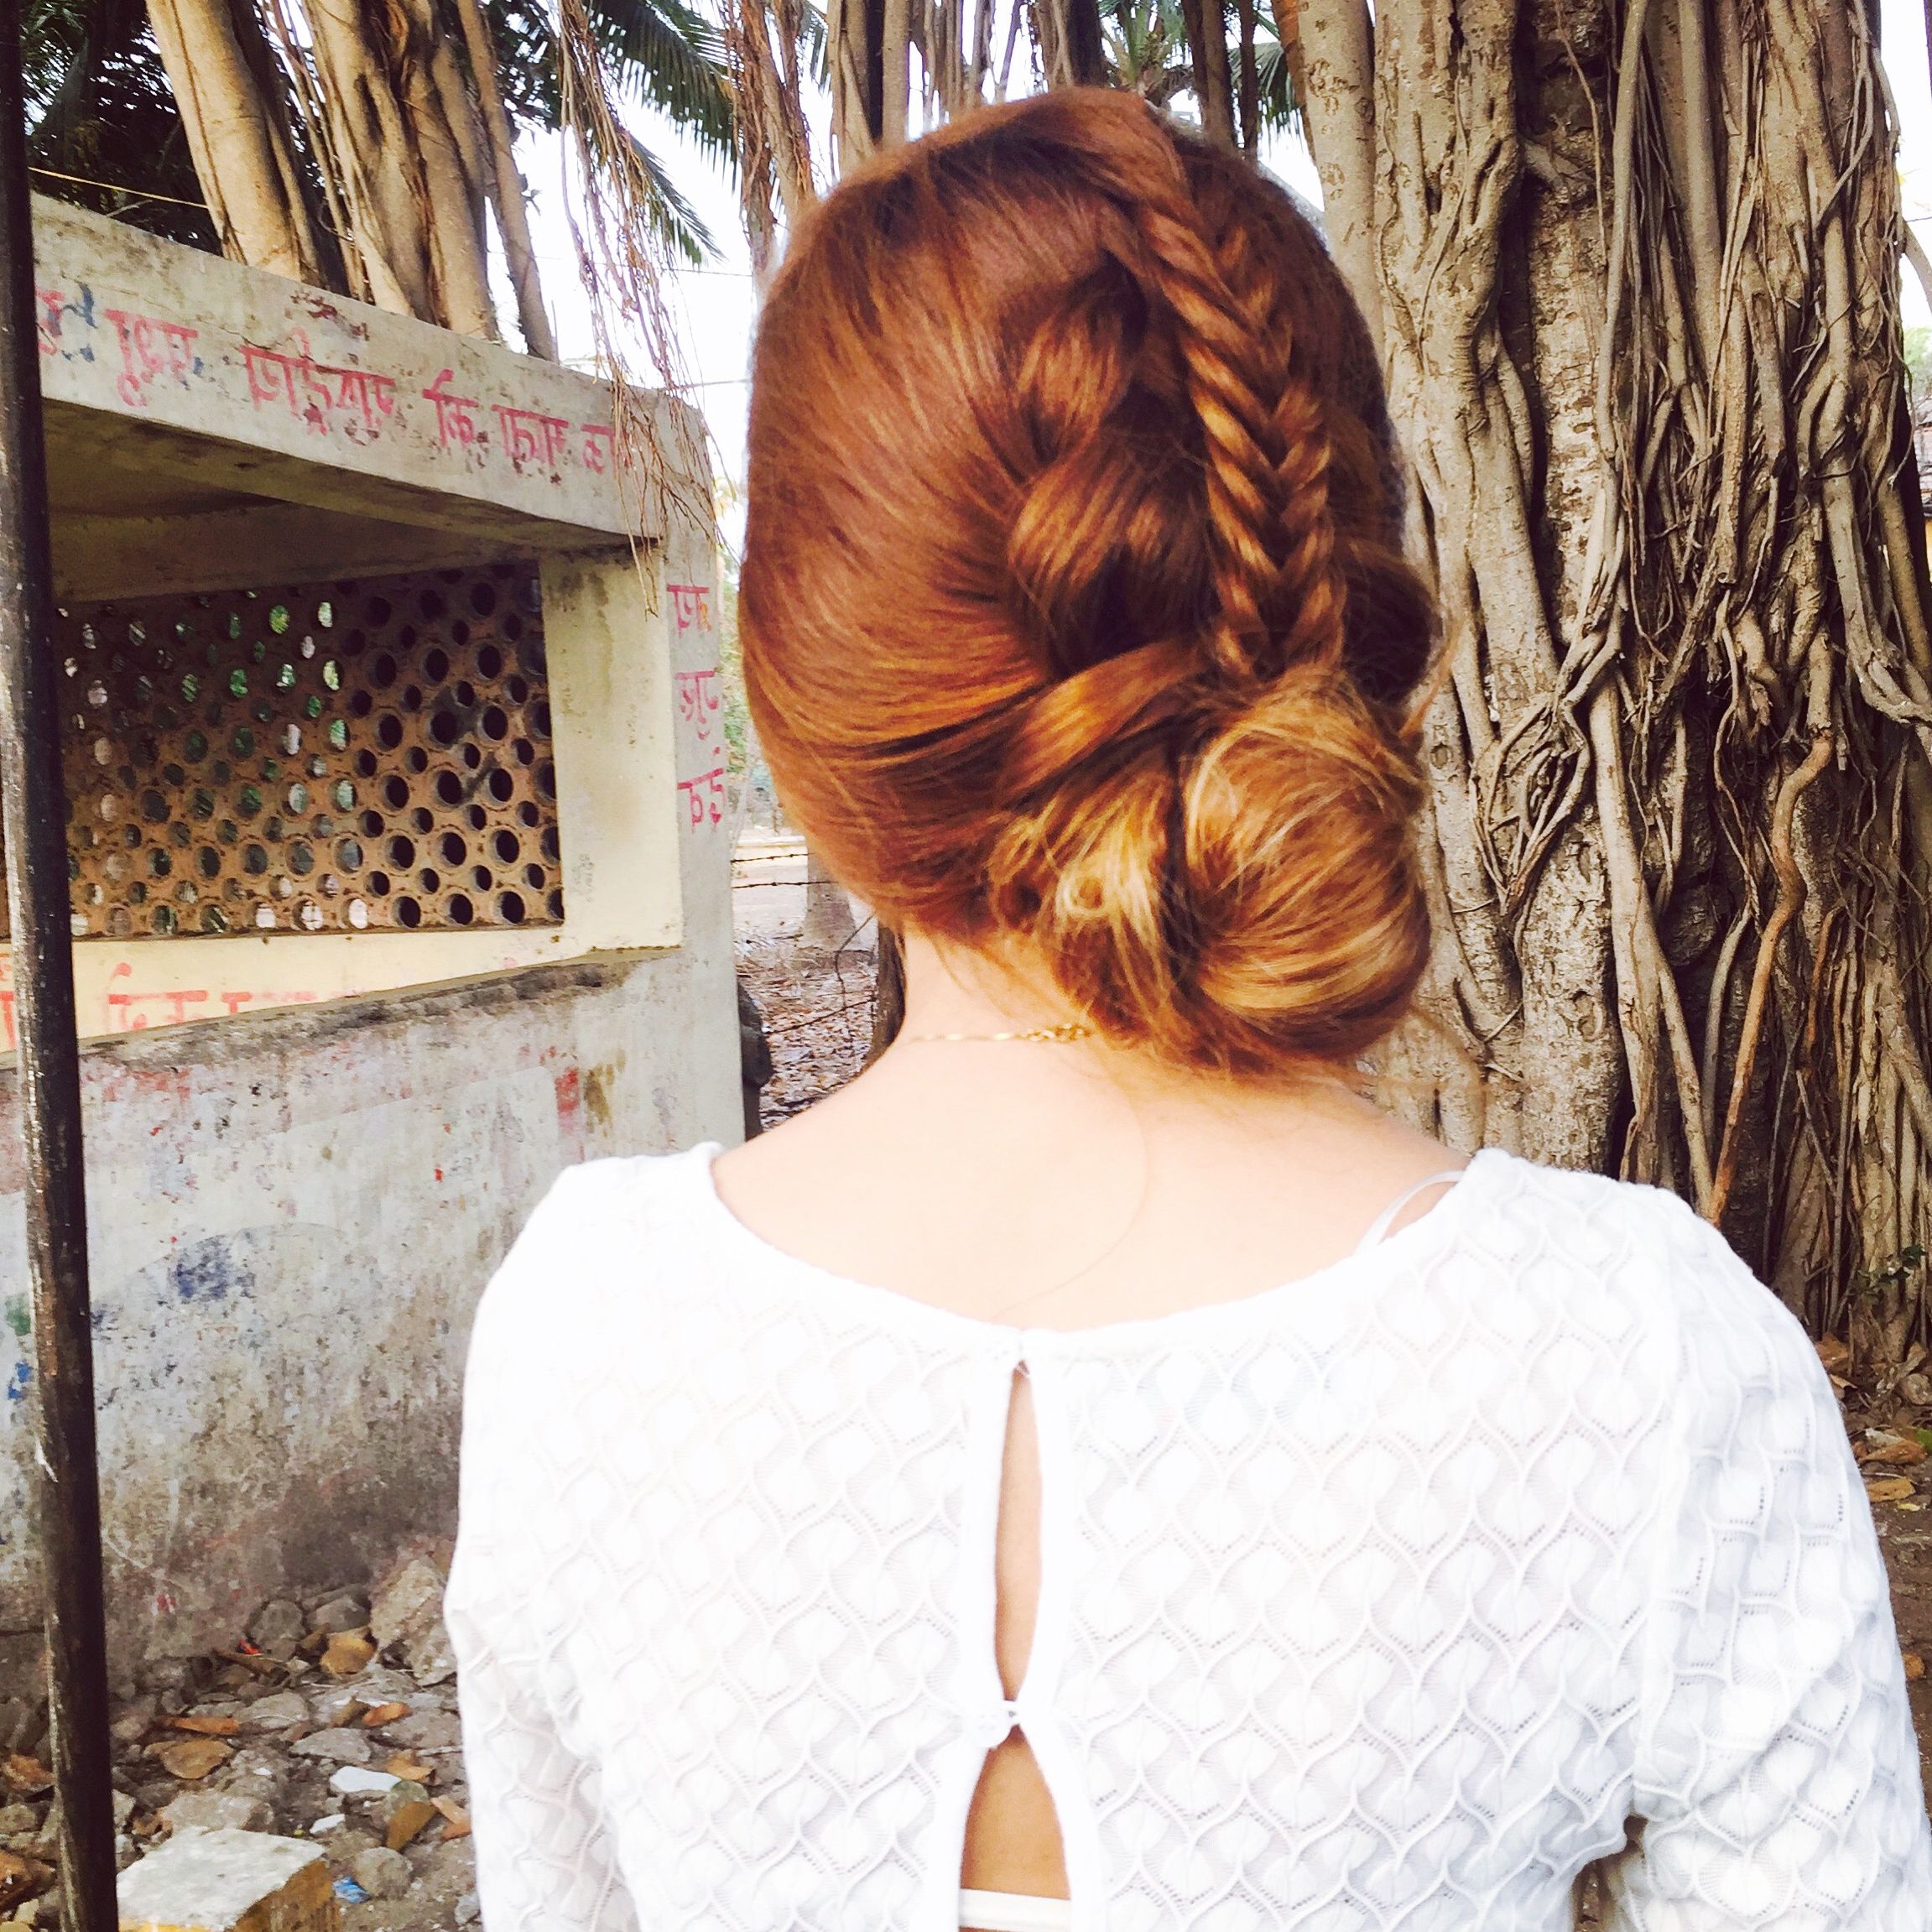 Widely Used Stacked Buns Updo Hairstyles For Tanvi Vayla » Stacked Fishtail Braid With Messy Bun (View 15 of 20)